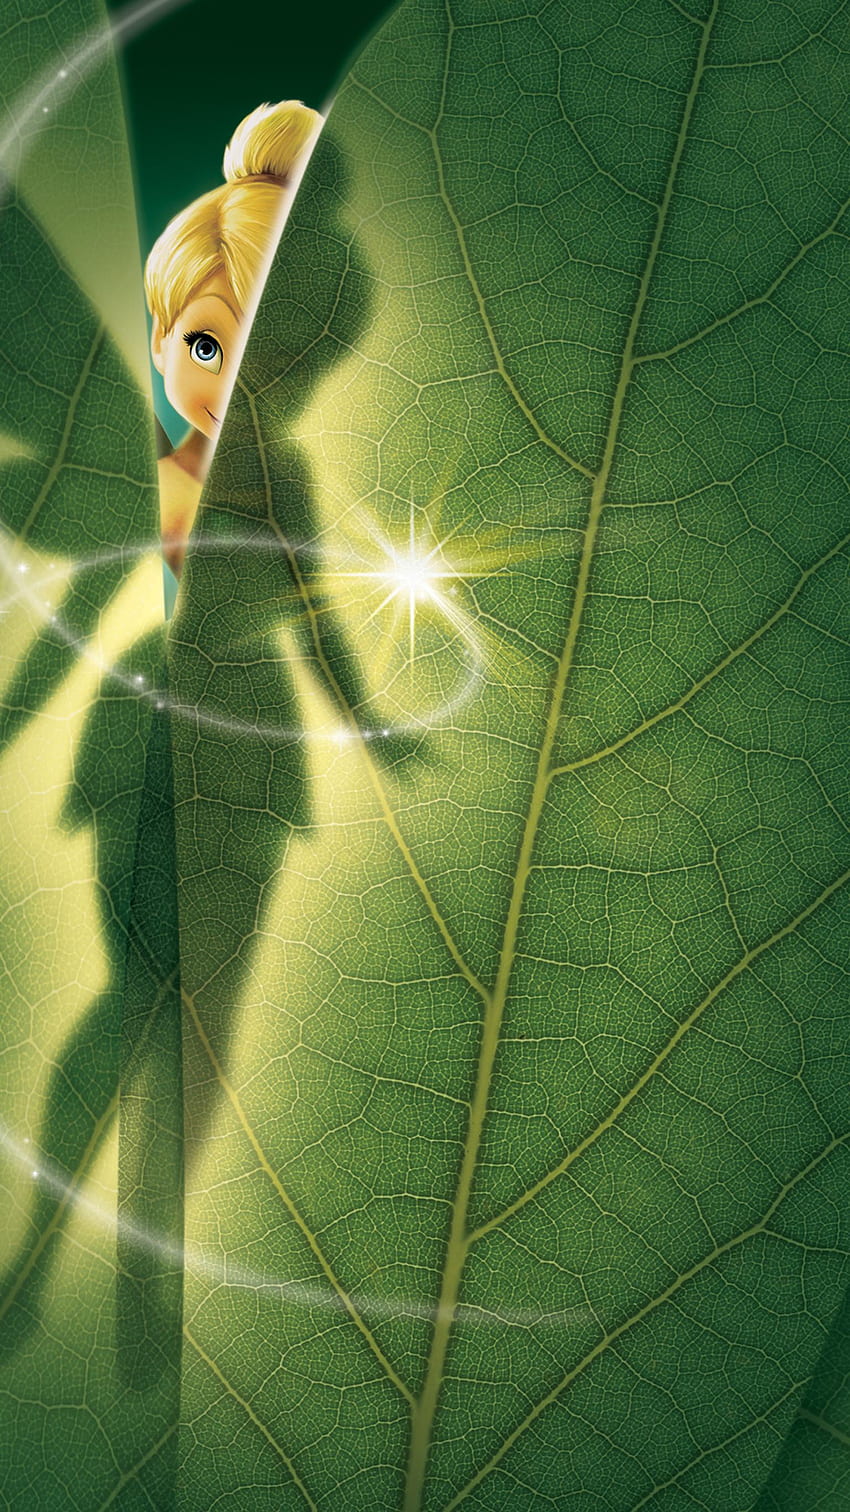 Tinker Bell peeks out from behind a leaf in the movie poster for Tinker Bell and the Great Fairy Rescue. - Tinkerbell